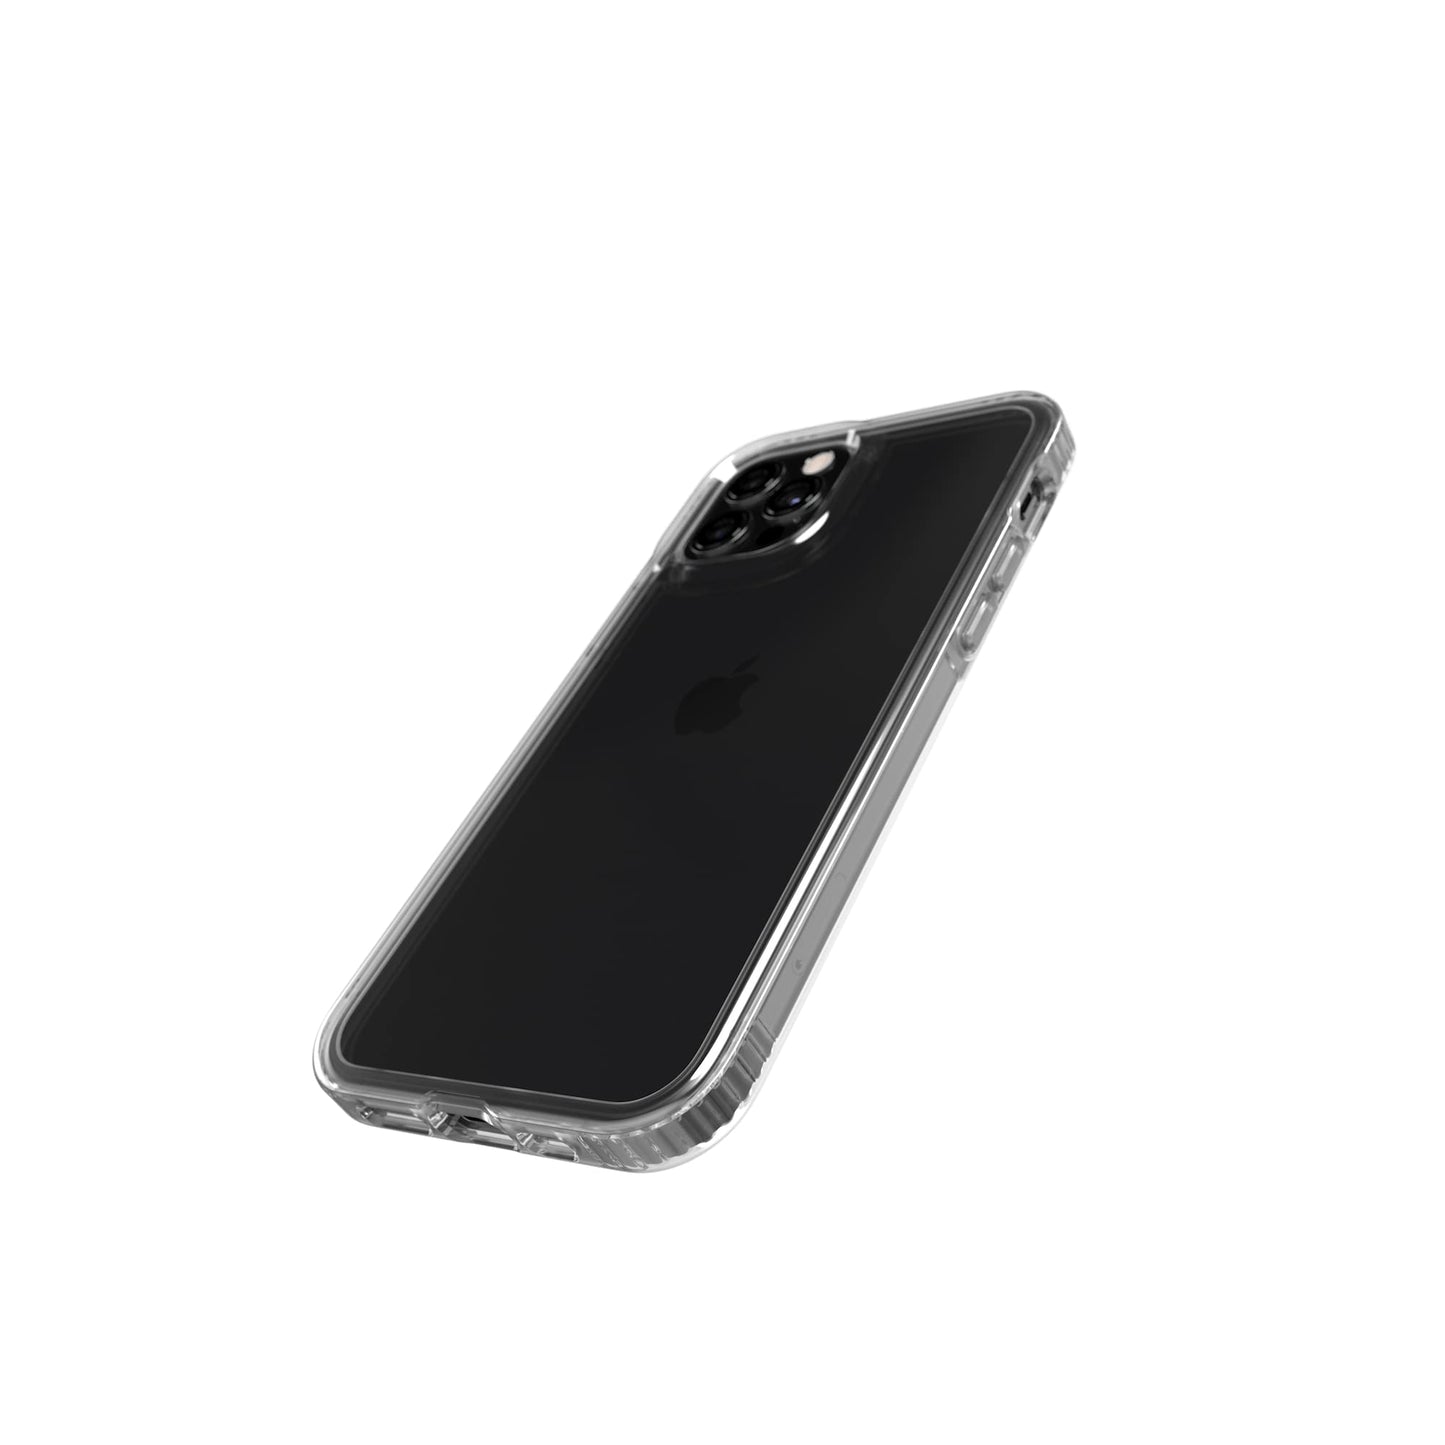 tech21 Evo Clear Phone Case for Apple iPhone 12 Pro Max 5G with 10 ft. Drop Protection